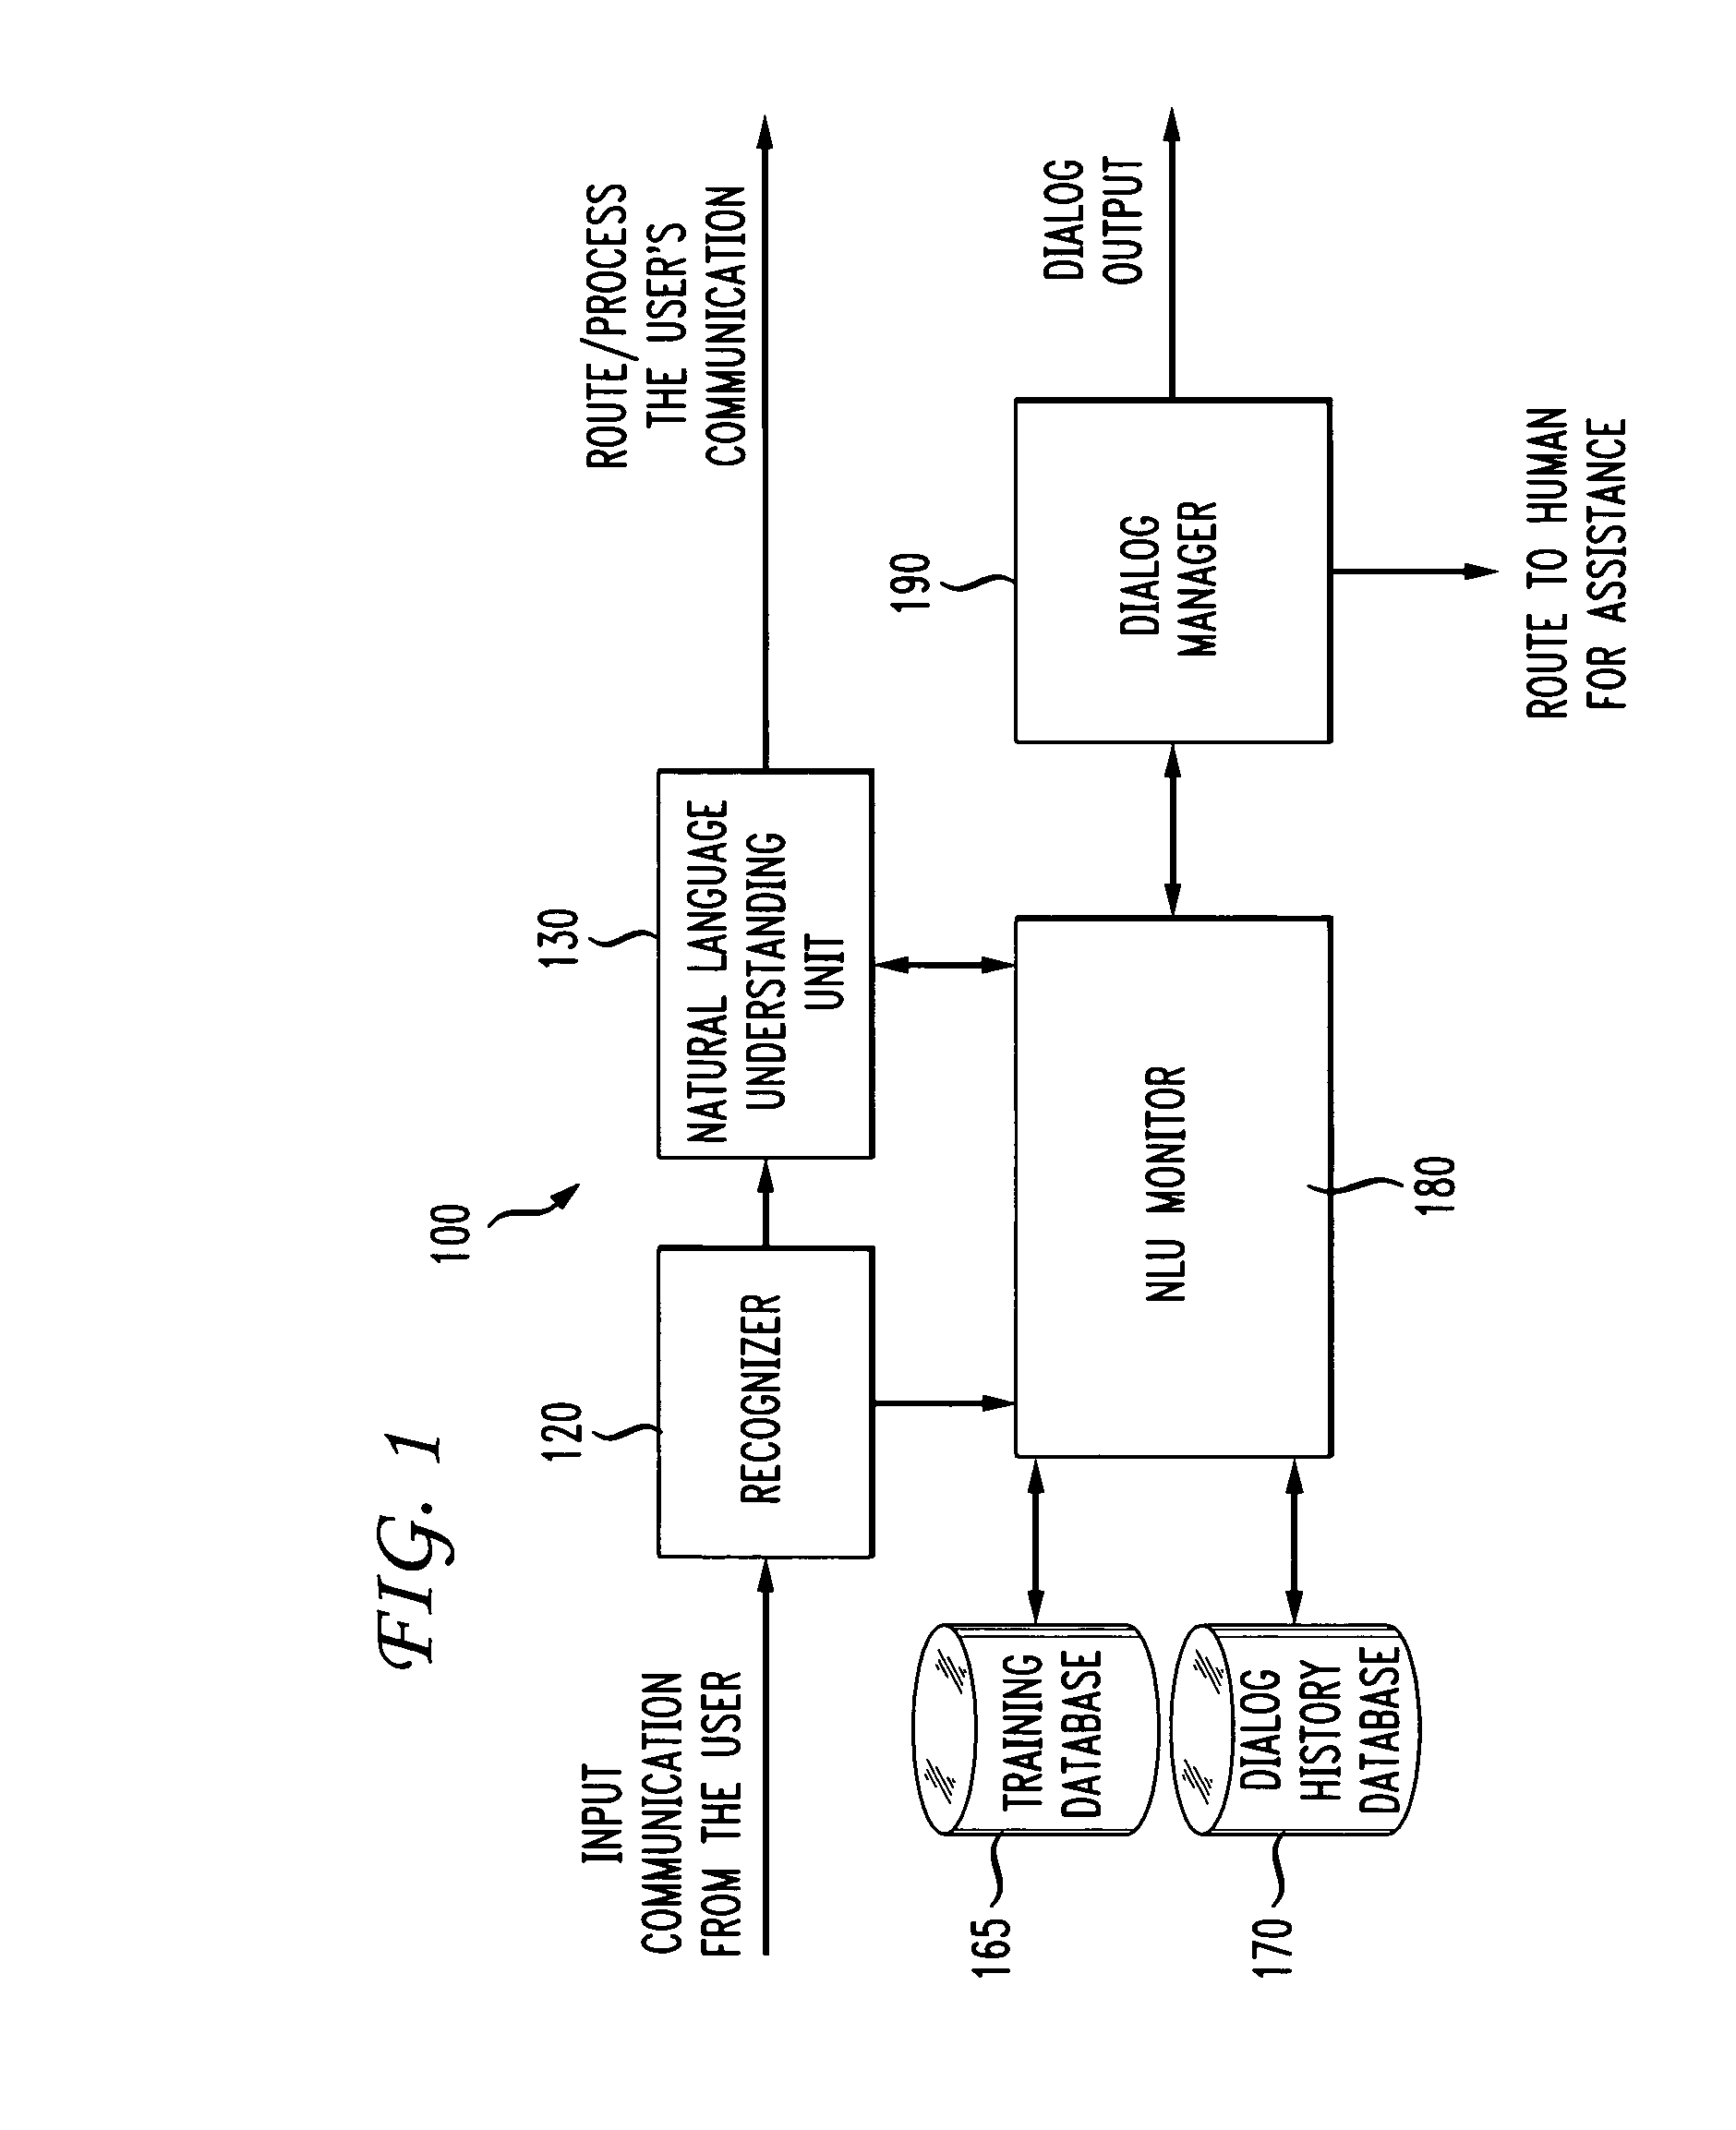 Method and system for predicting understanding errors in a task classification system